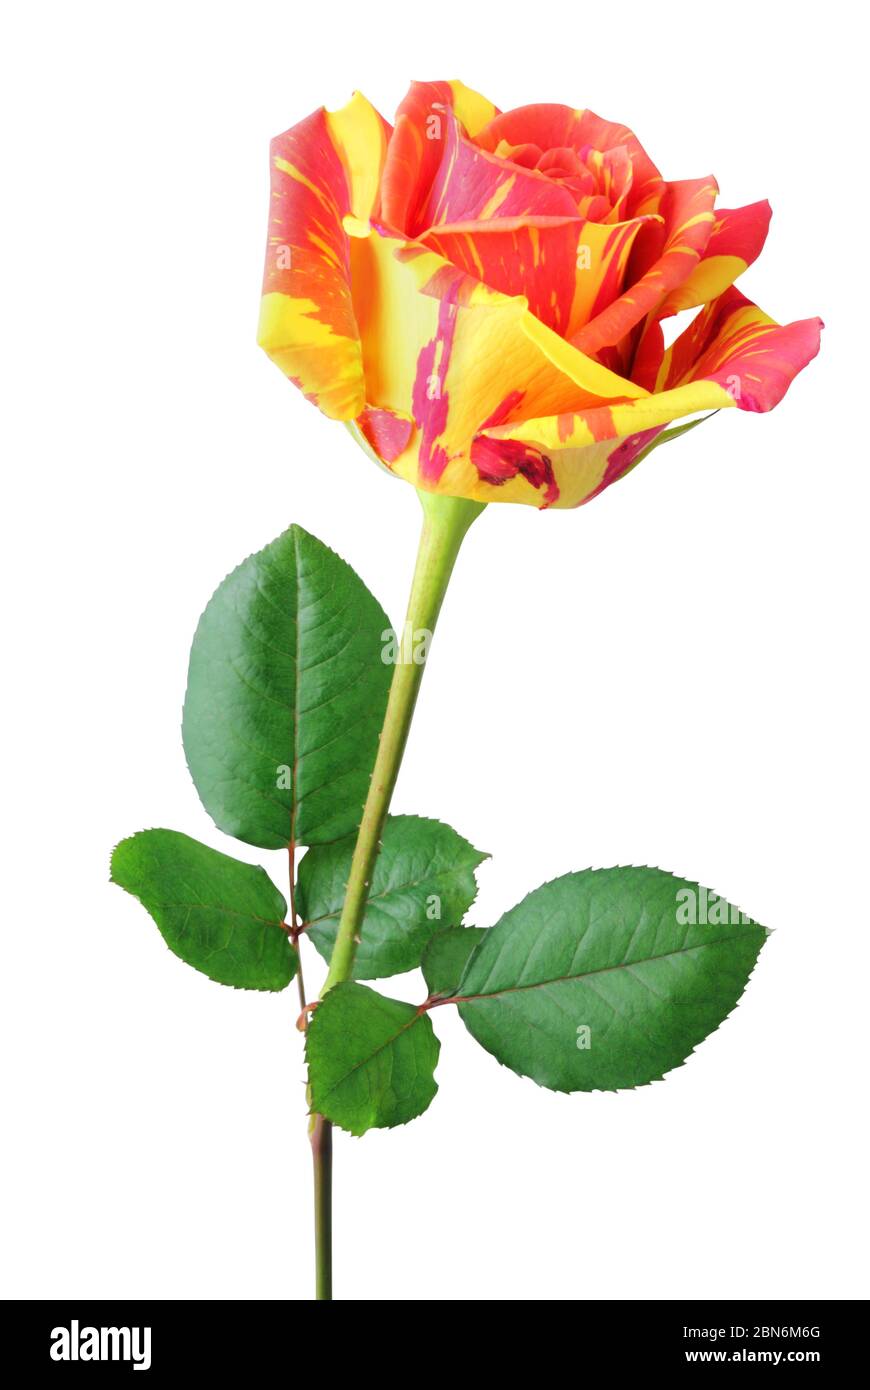 Colorful Rose (Rosaceae) in yellow and orange color in side view, isolated on white background. Germany Stock Photo